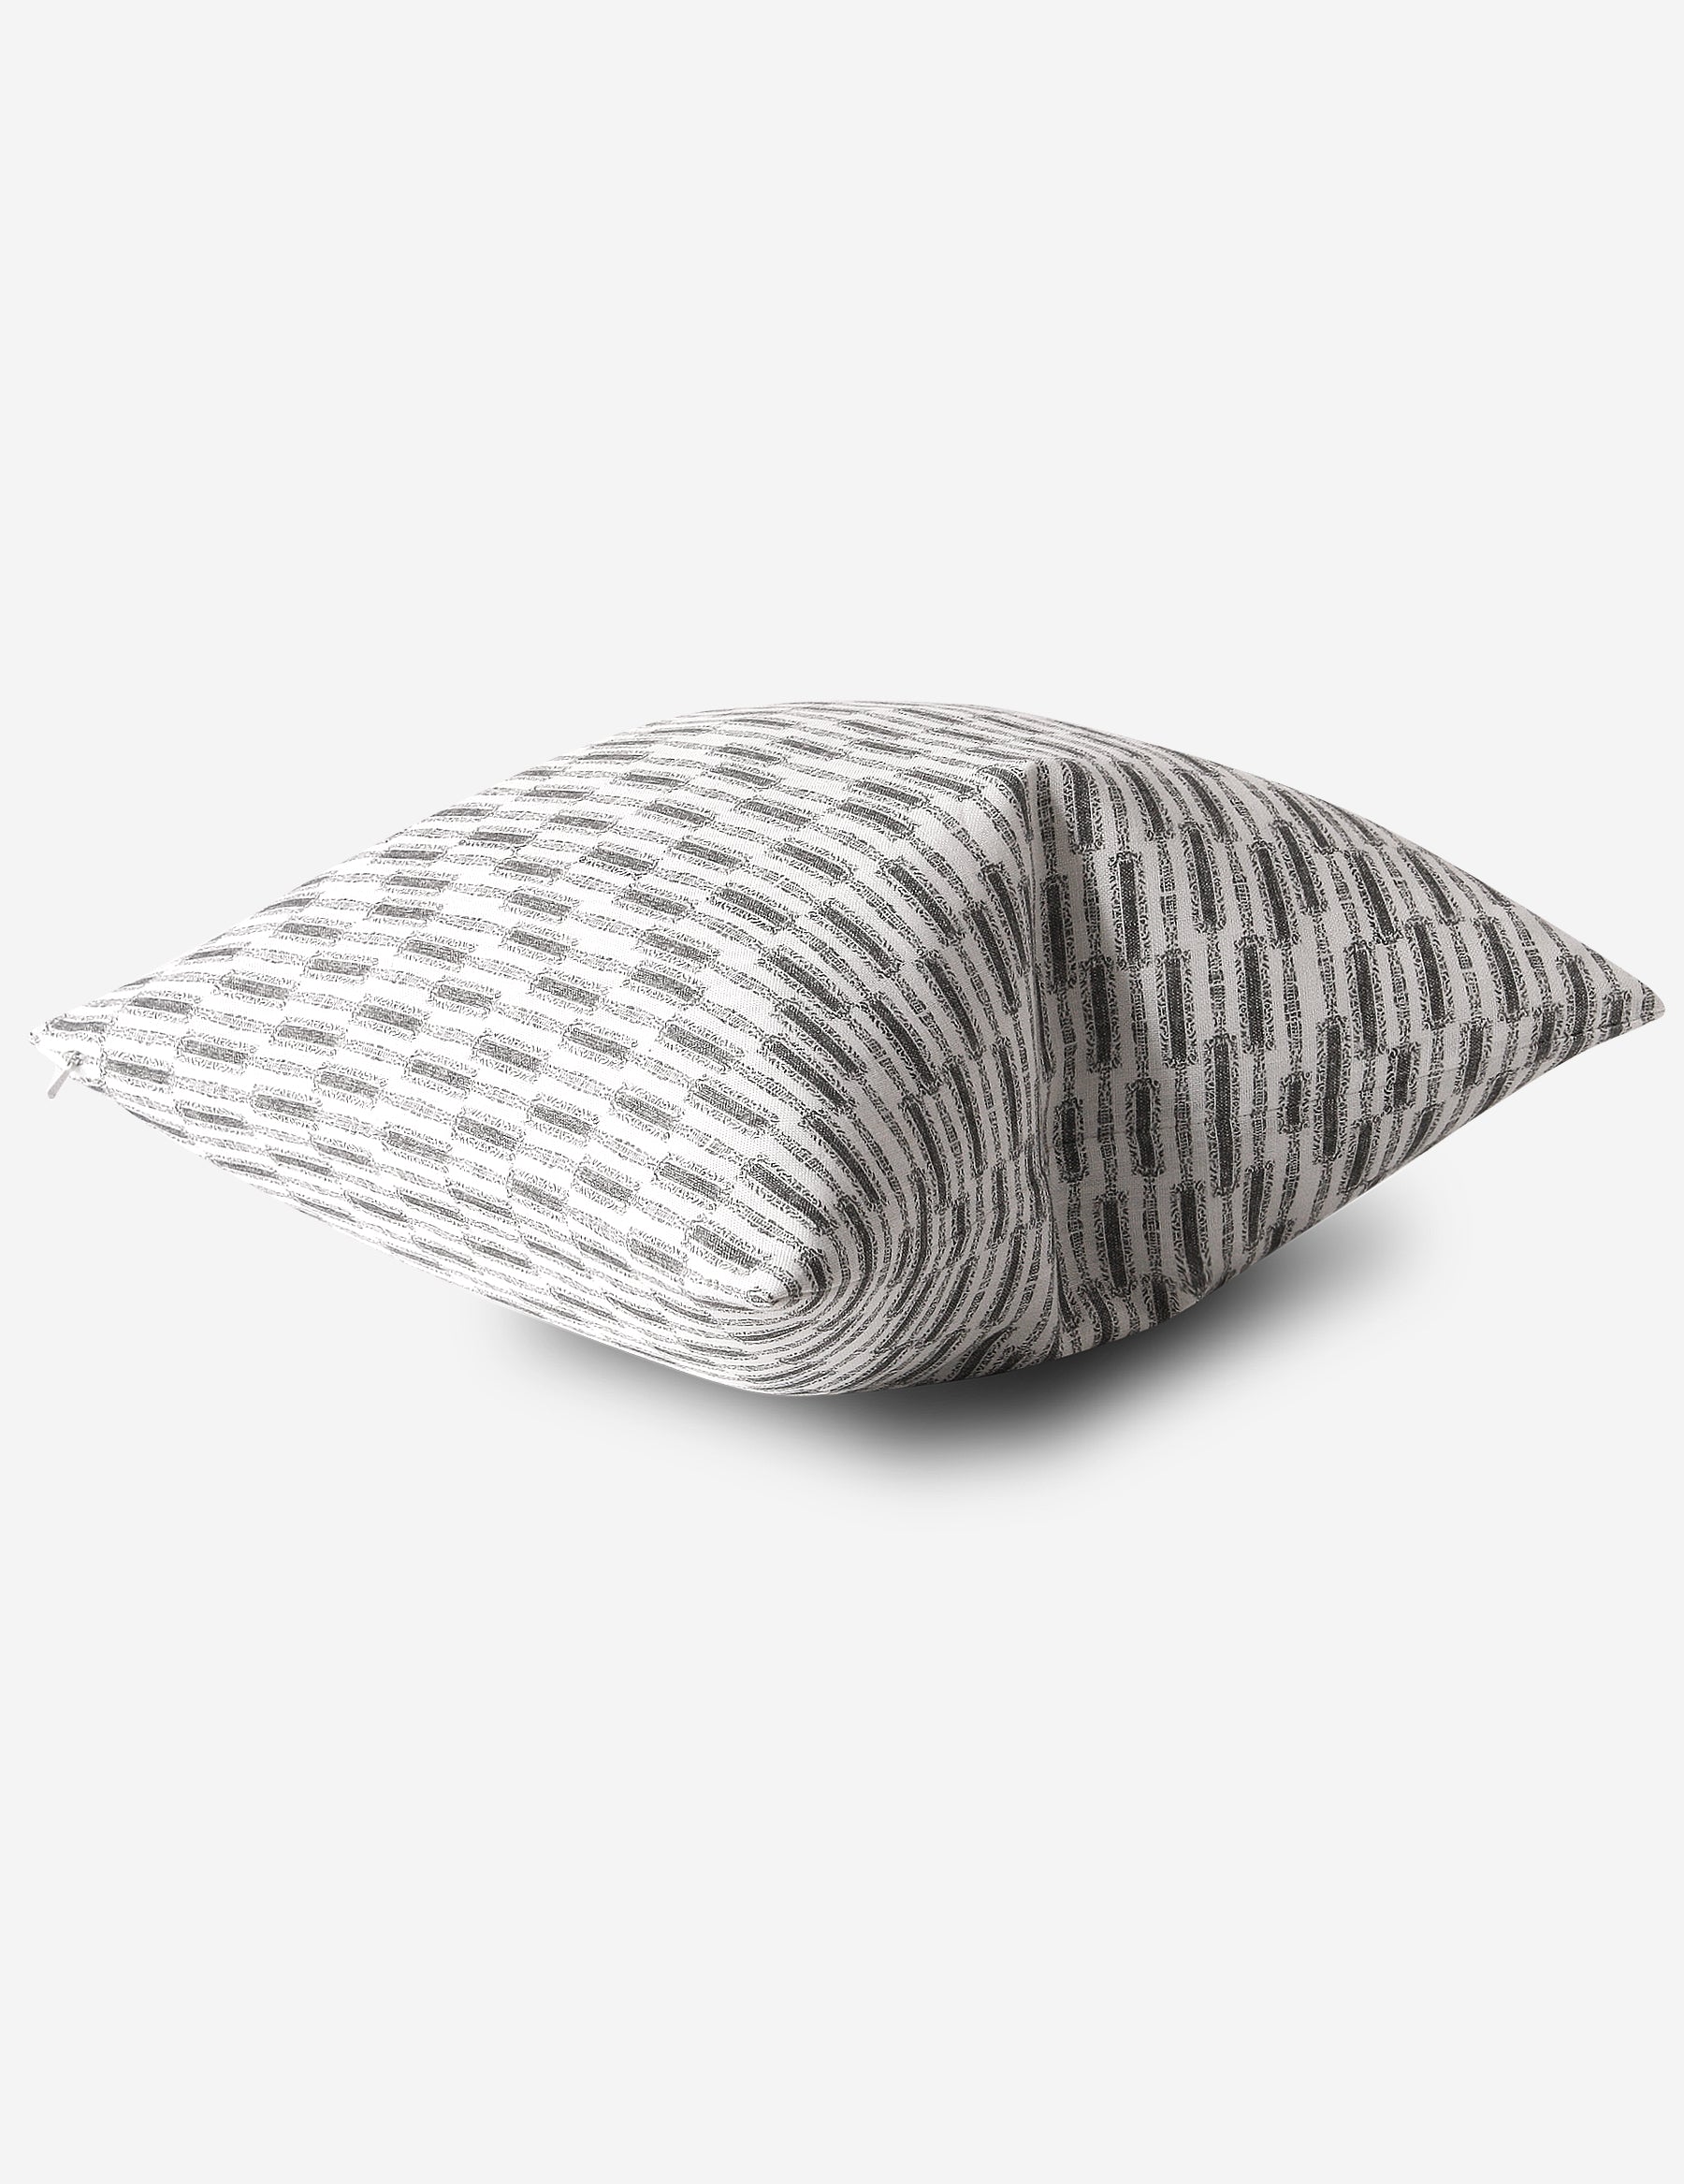 Lacuna Pillow / Kohl Oyster